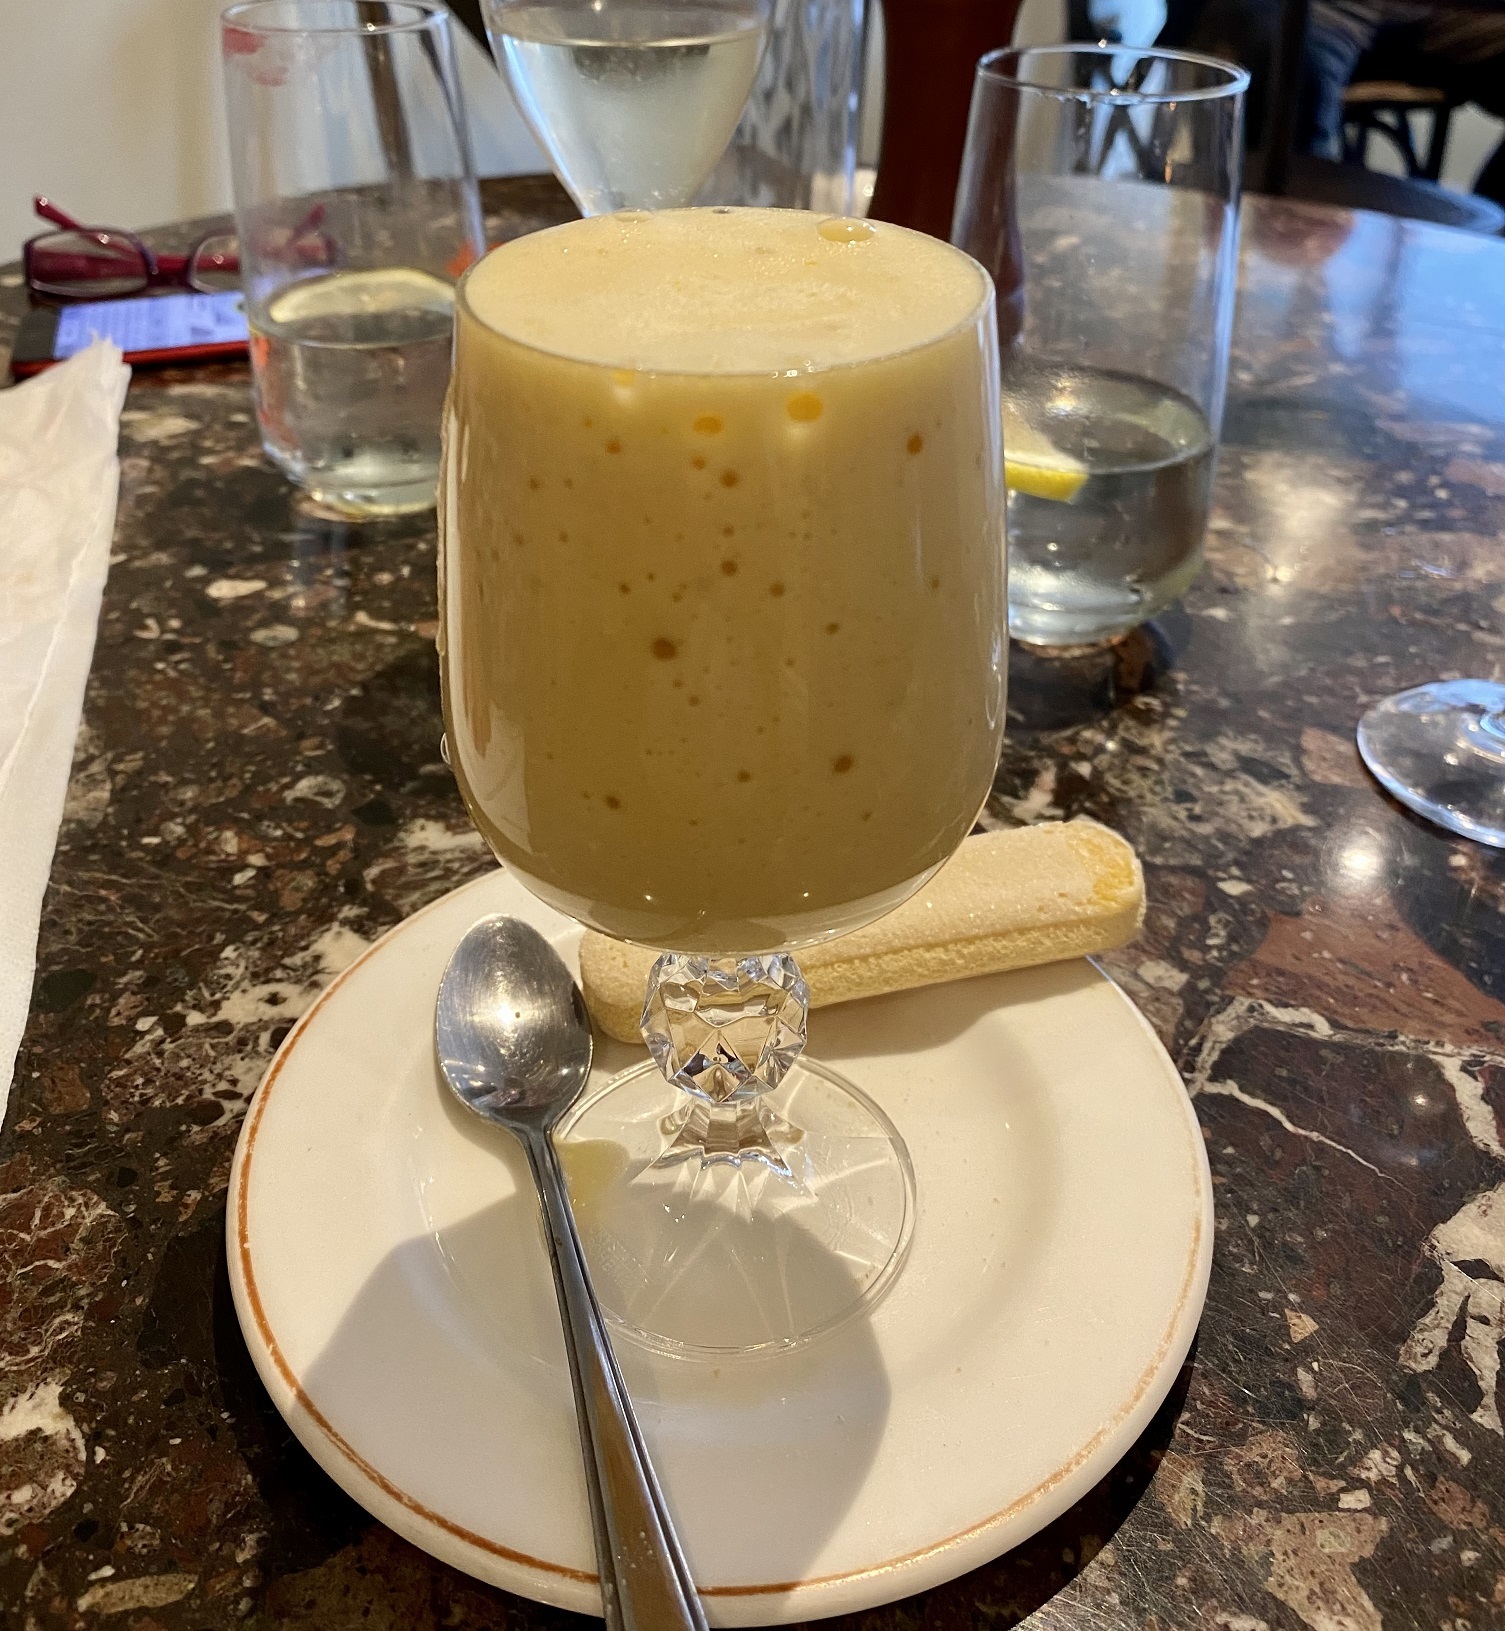 Zabaglione, a classic dessert with just three ingredients